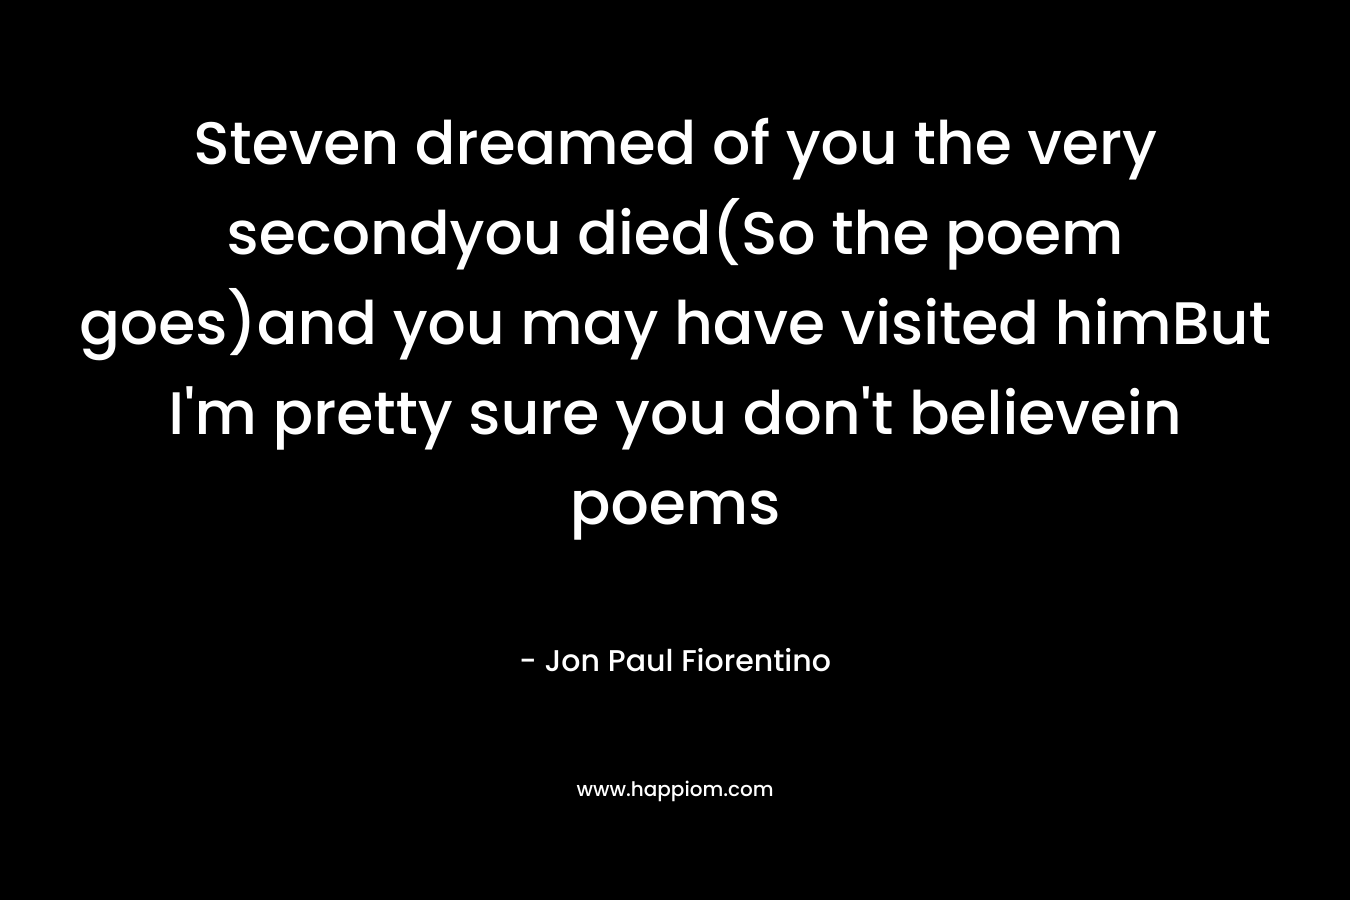 Steven dreamed of you the very secondyou died(So the poem goes)and you may have visited himBut I'm pretty sure you don't believein poems